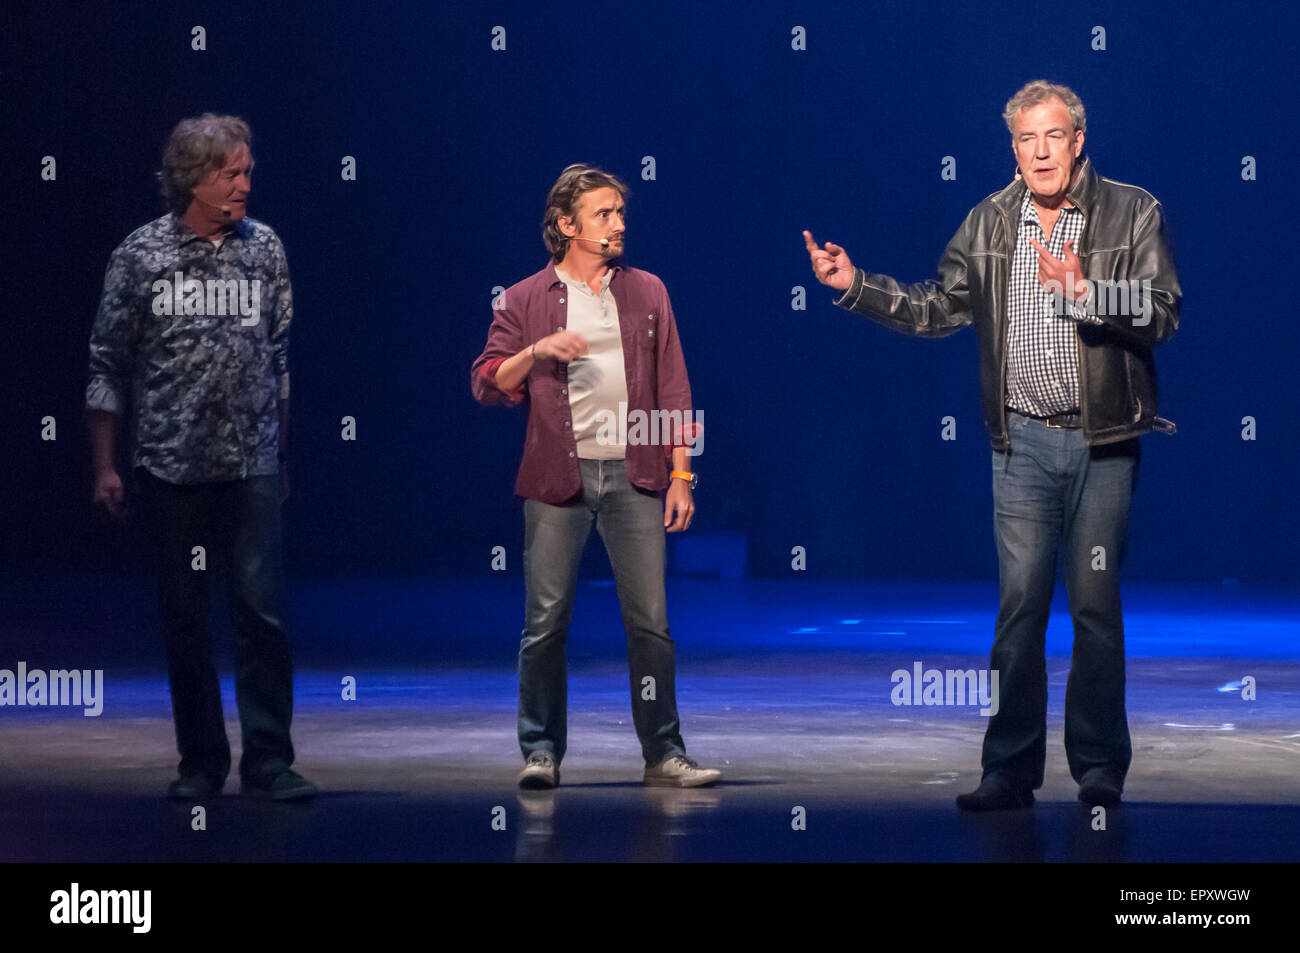 Belfast, Northern Ireland. 22 May 2015 - Clarkson, Hammond and May premier their car show Credit:  Stephen Barnes/Alamy Live News Stock Photo